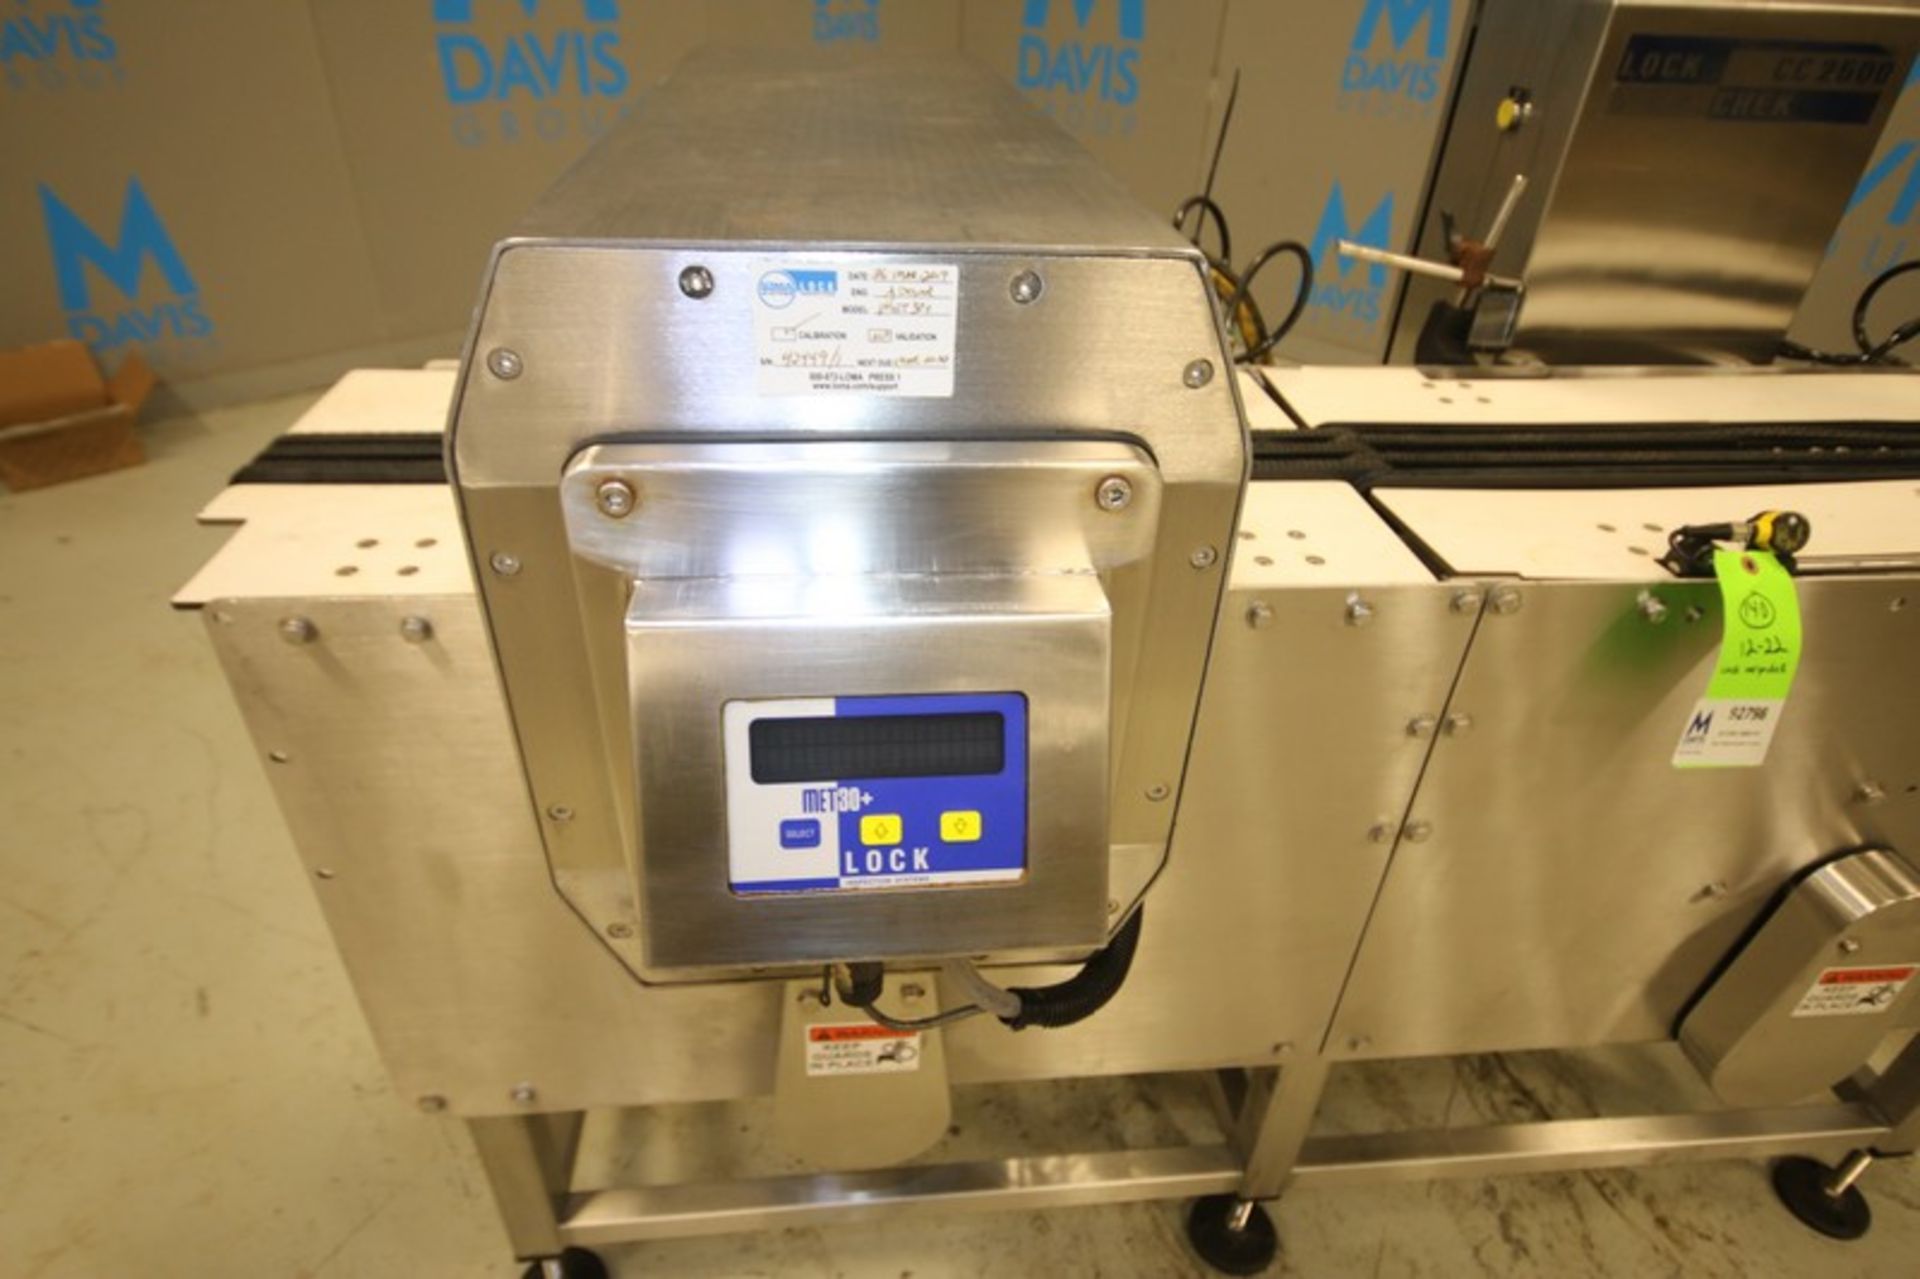 2010 Lock Weighchek S/S Metal Detector / Check-Weigher, Model CC2500 WEIGHCHECK-CHAIN, SN LIS1002- - Image 6 of 9